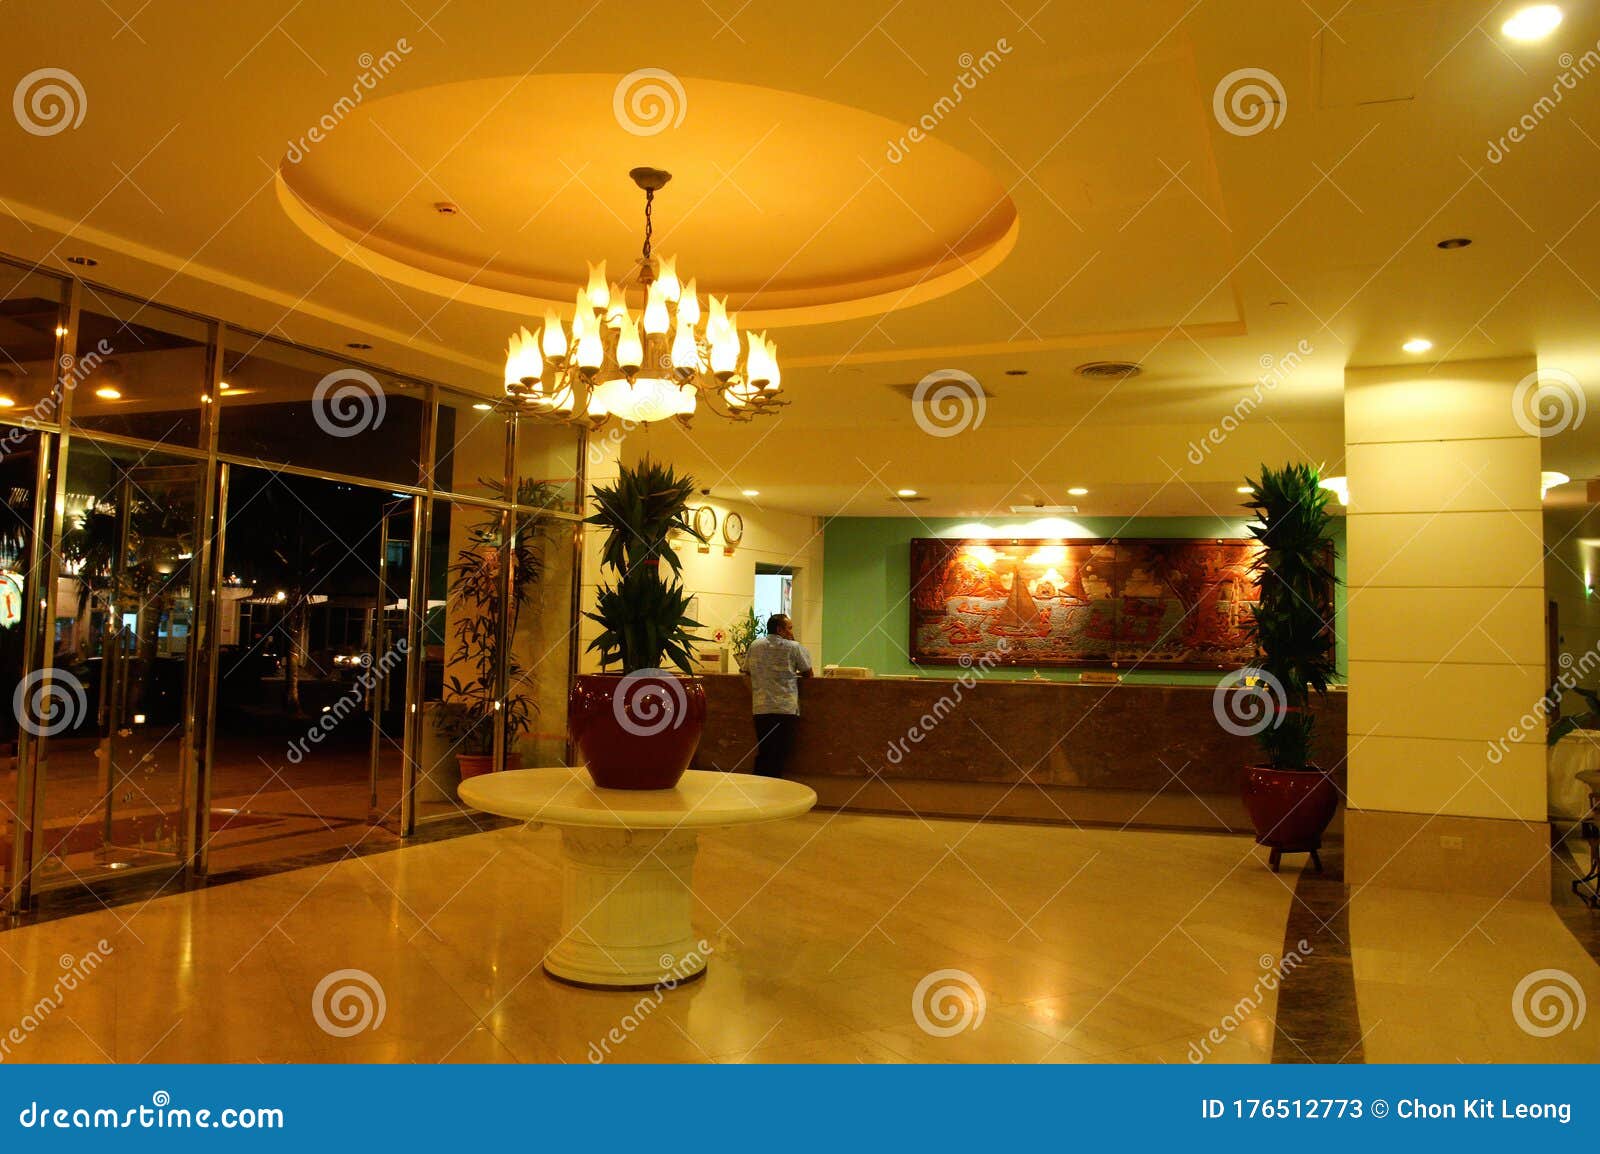 Night Interior View of the Famous Galleria at Sunset Shopping Mall  Editorial Image - Image of interior, states: 174681850